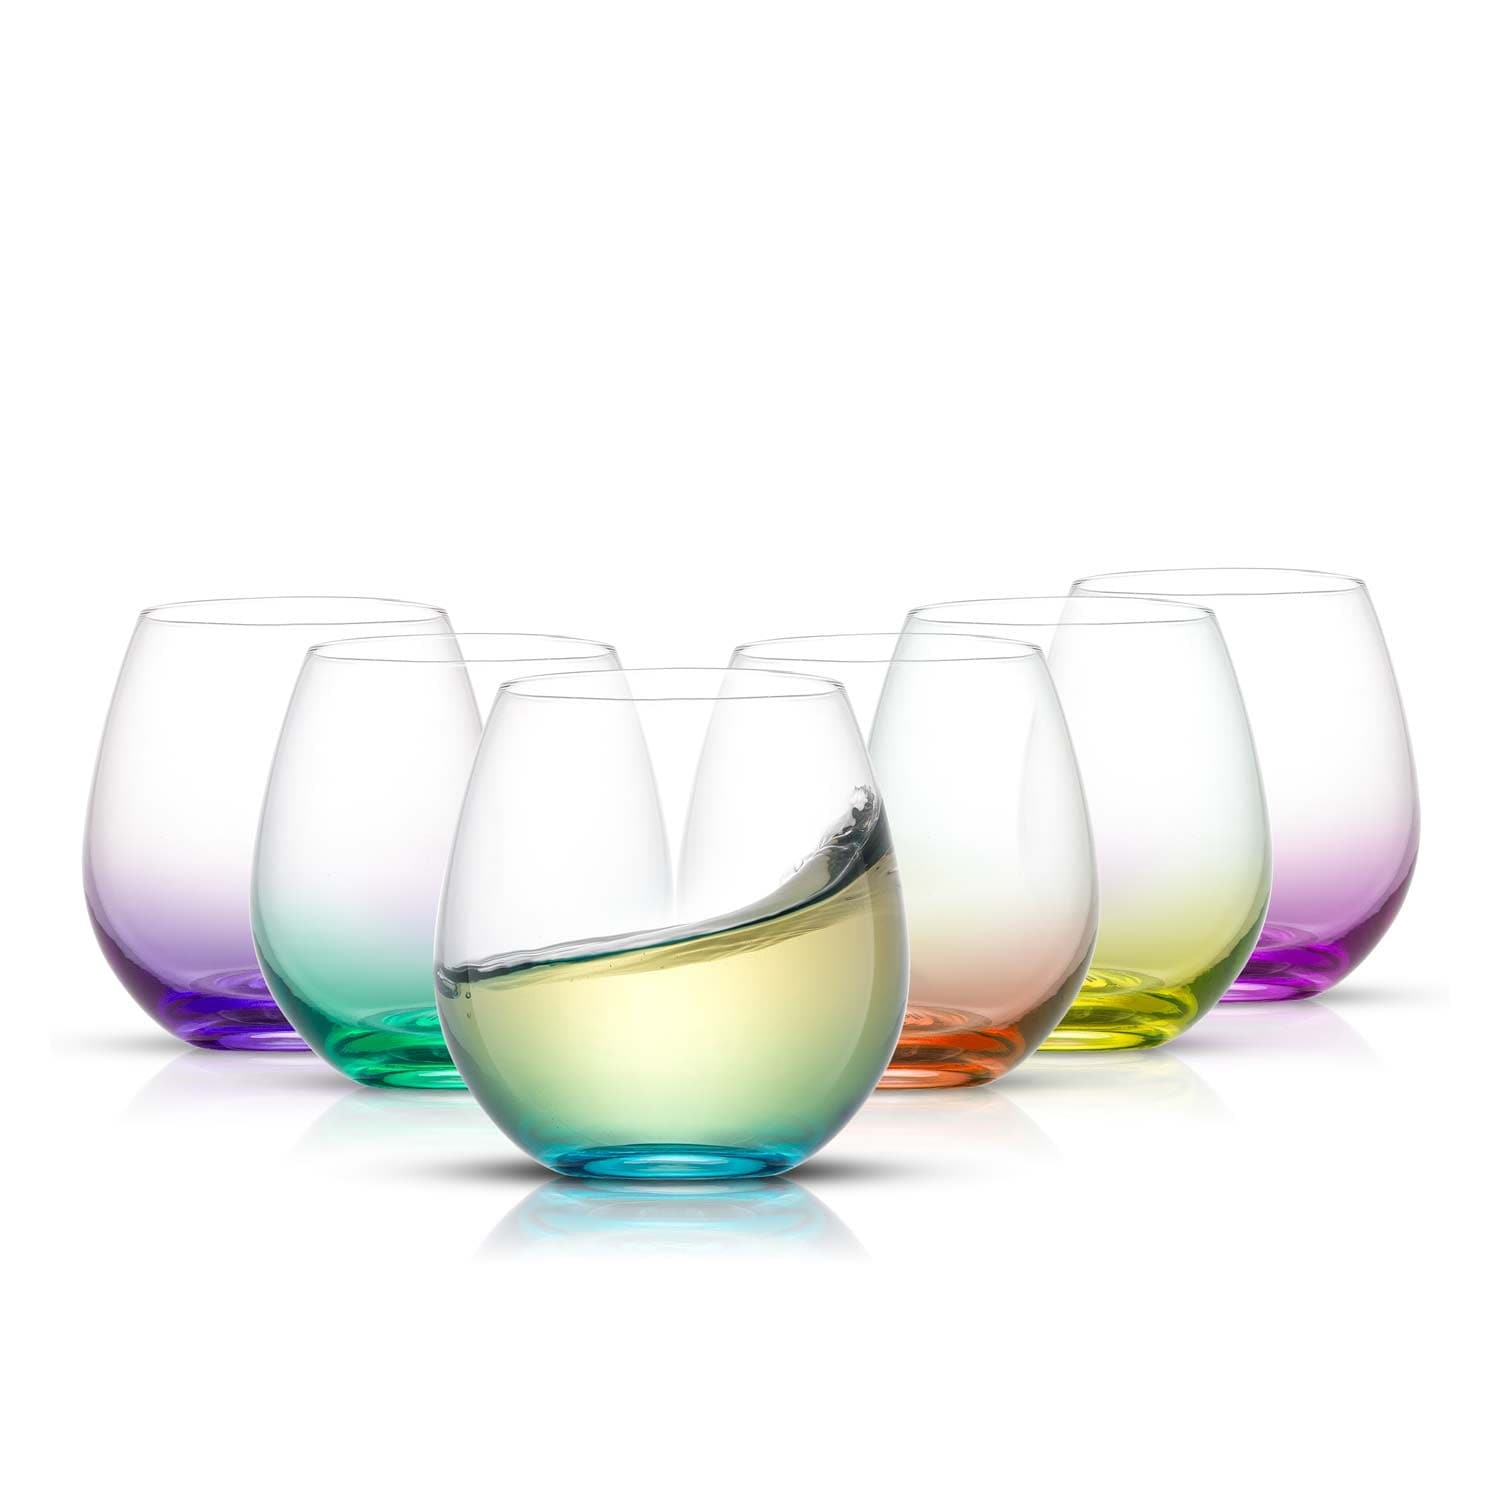 https://ak1.ostkcdn.com/images/products/is/images/direct/e4a59e453edae5e8b84b0cdde6e386d12034b366/JoyJolt-Hue-Colored-Stemless-Wine-Glasses---15-oz---Set-of-6.jpg